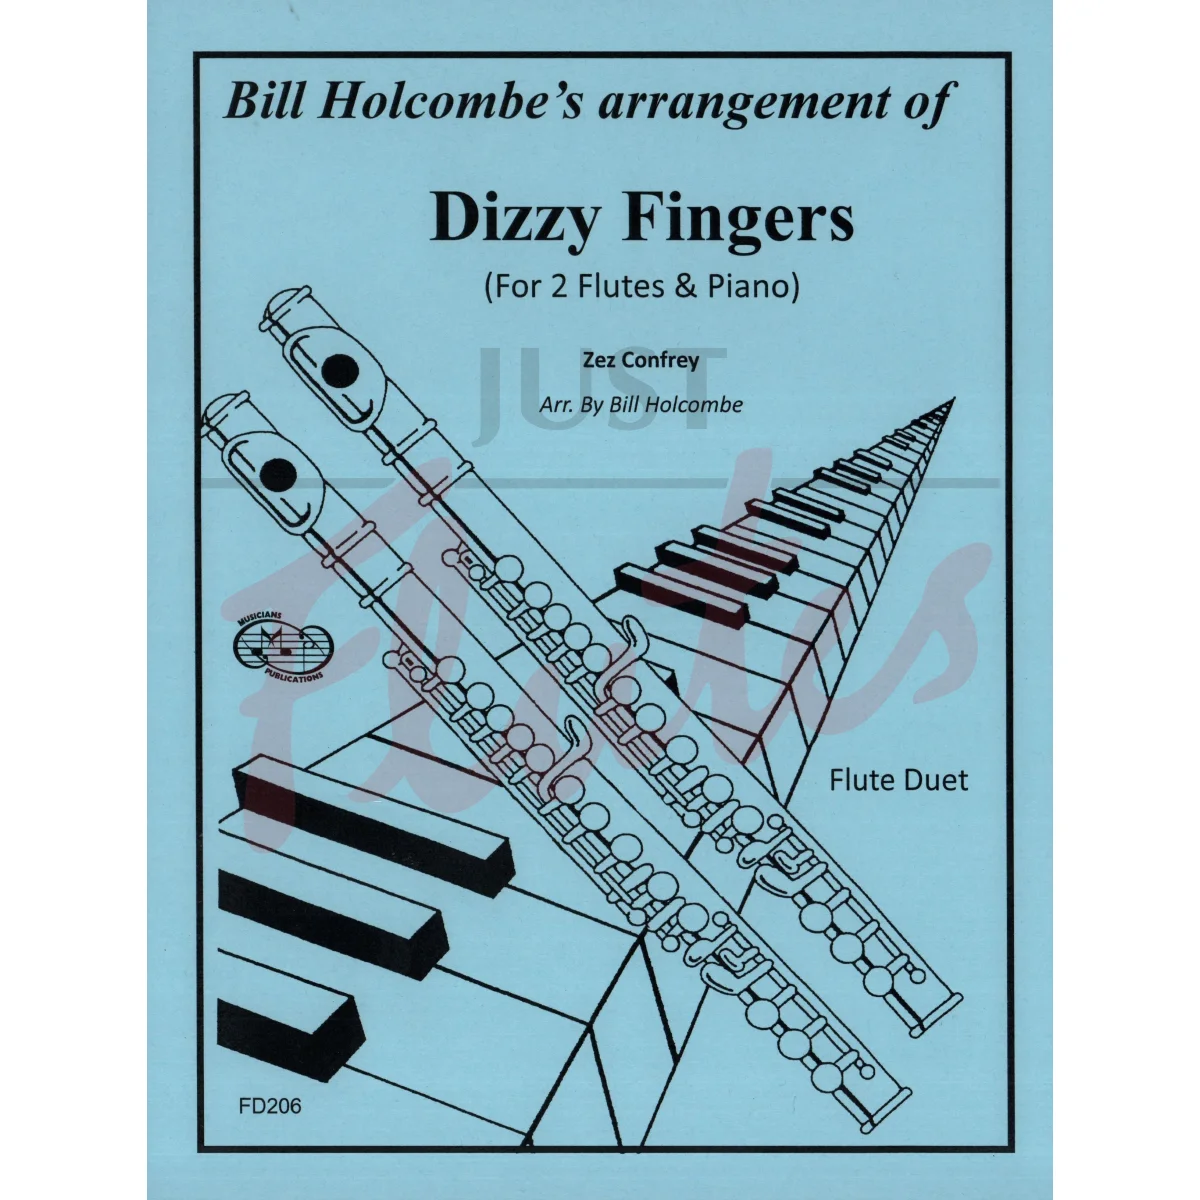 Dizzy Fingers for Two Flutes and Piano